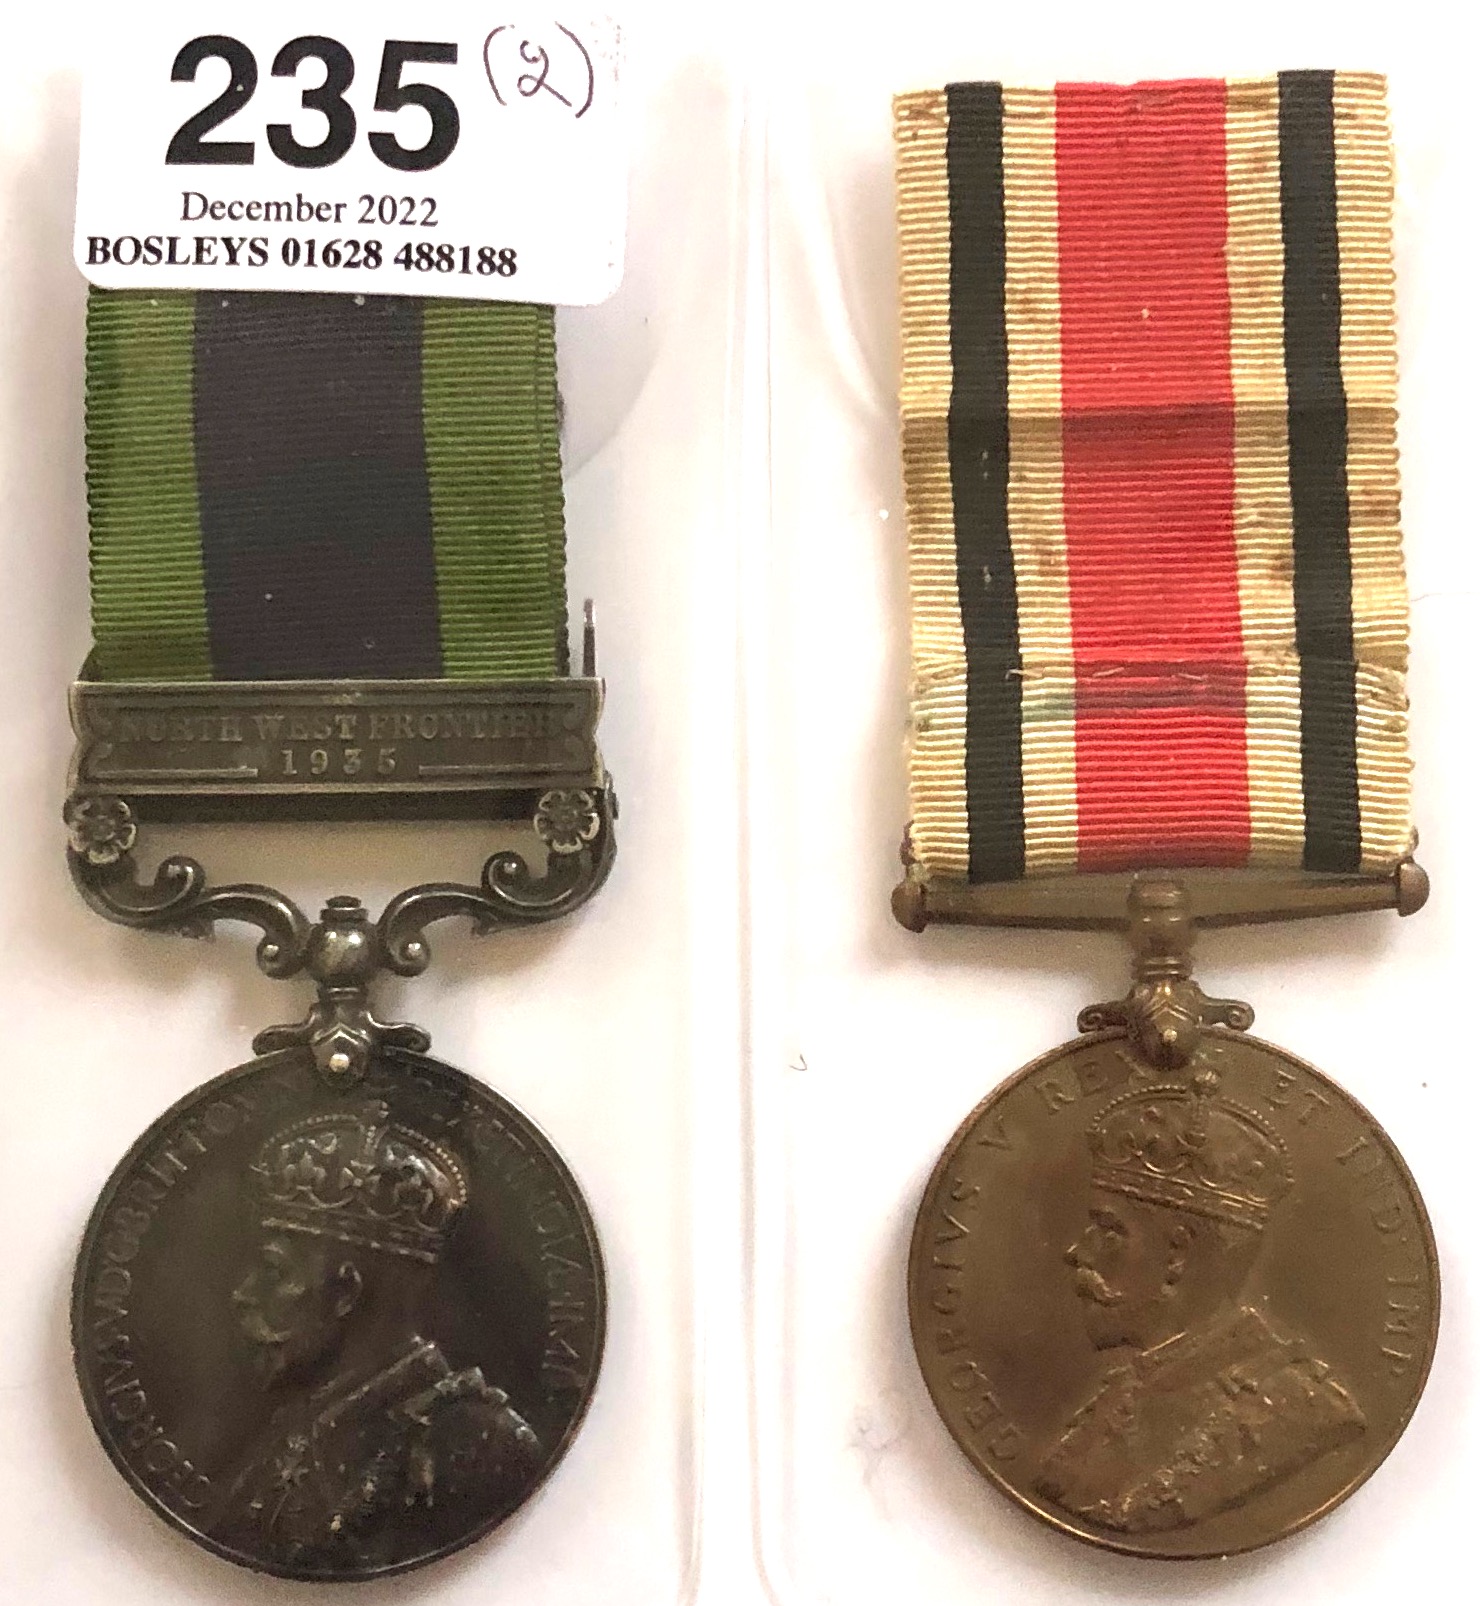 1st Bn Hampshire Regiment India General Service Medal Clasp NORTH WEST FRONTIER 1935. Awarded to